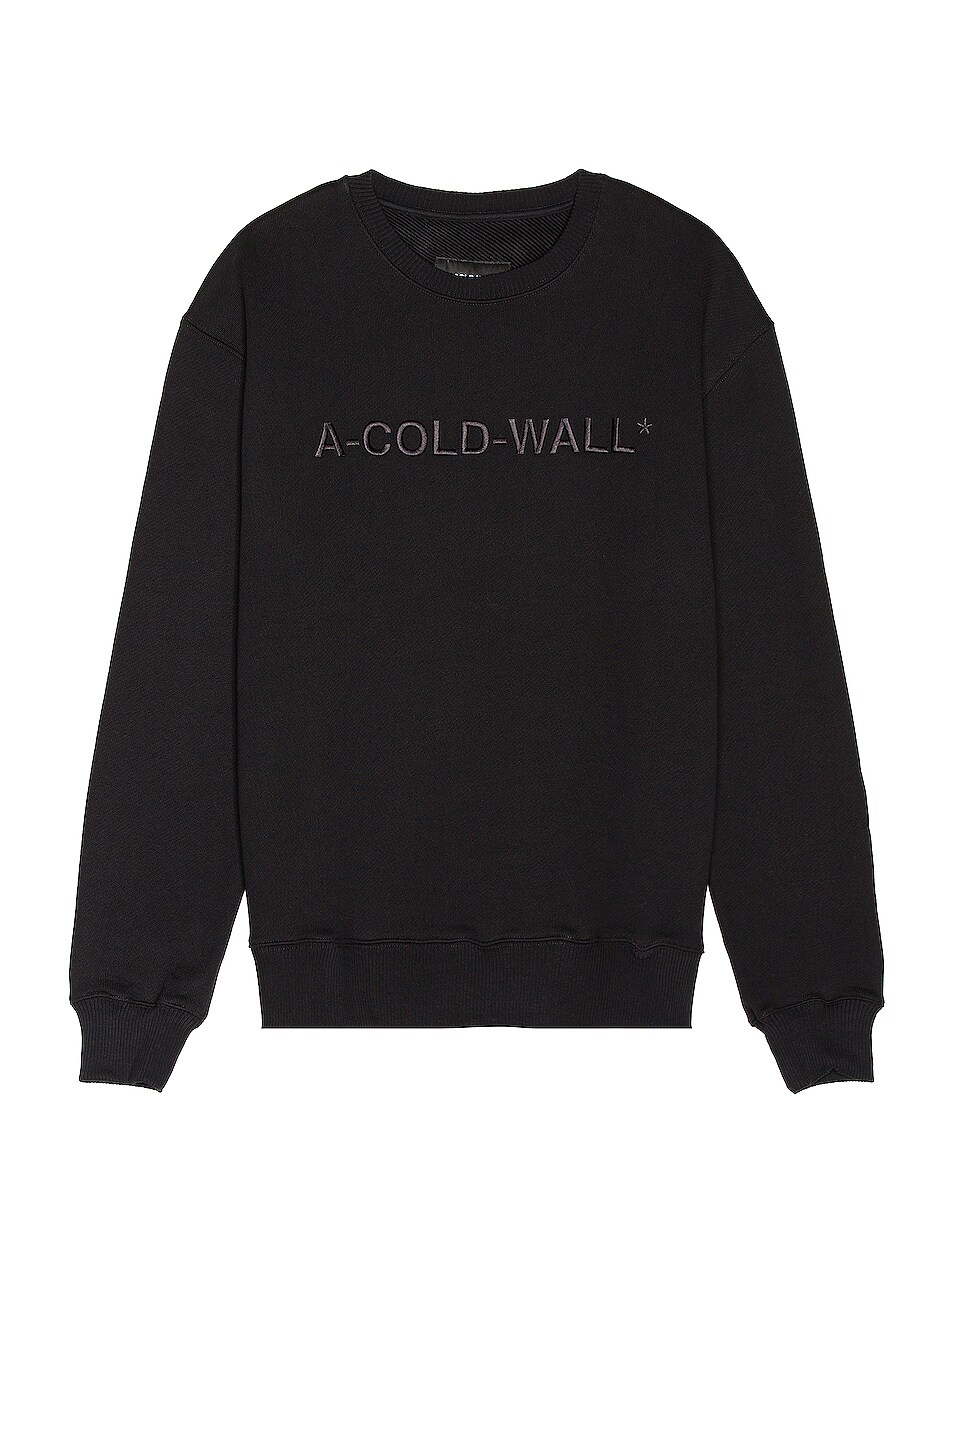 Image 1 of A-COLD-WALL* Logo Sweatshirt in Black